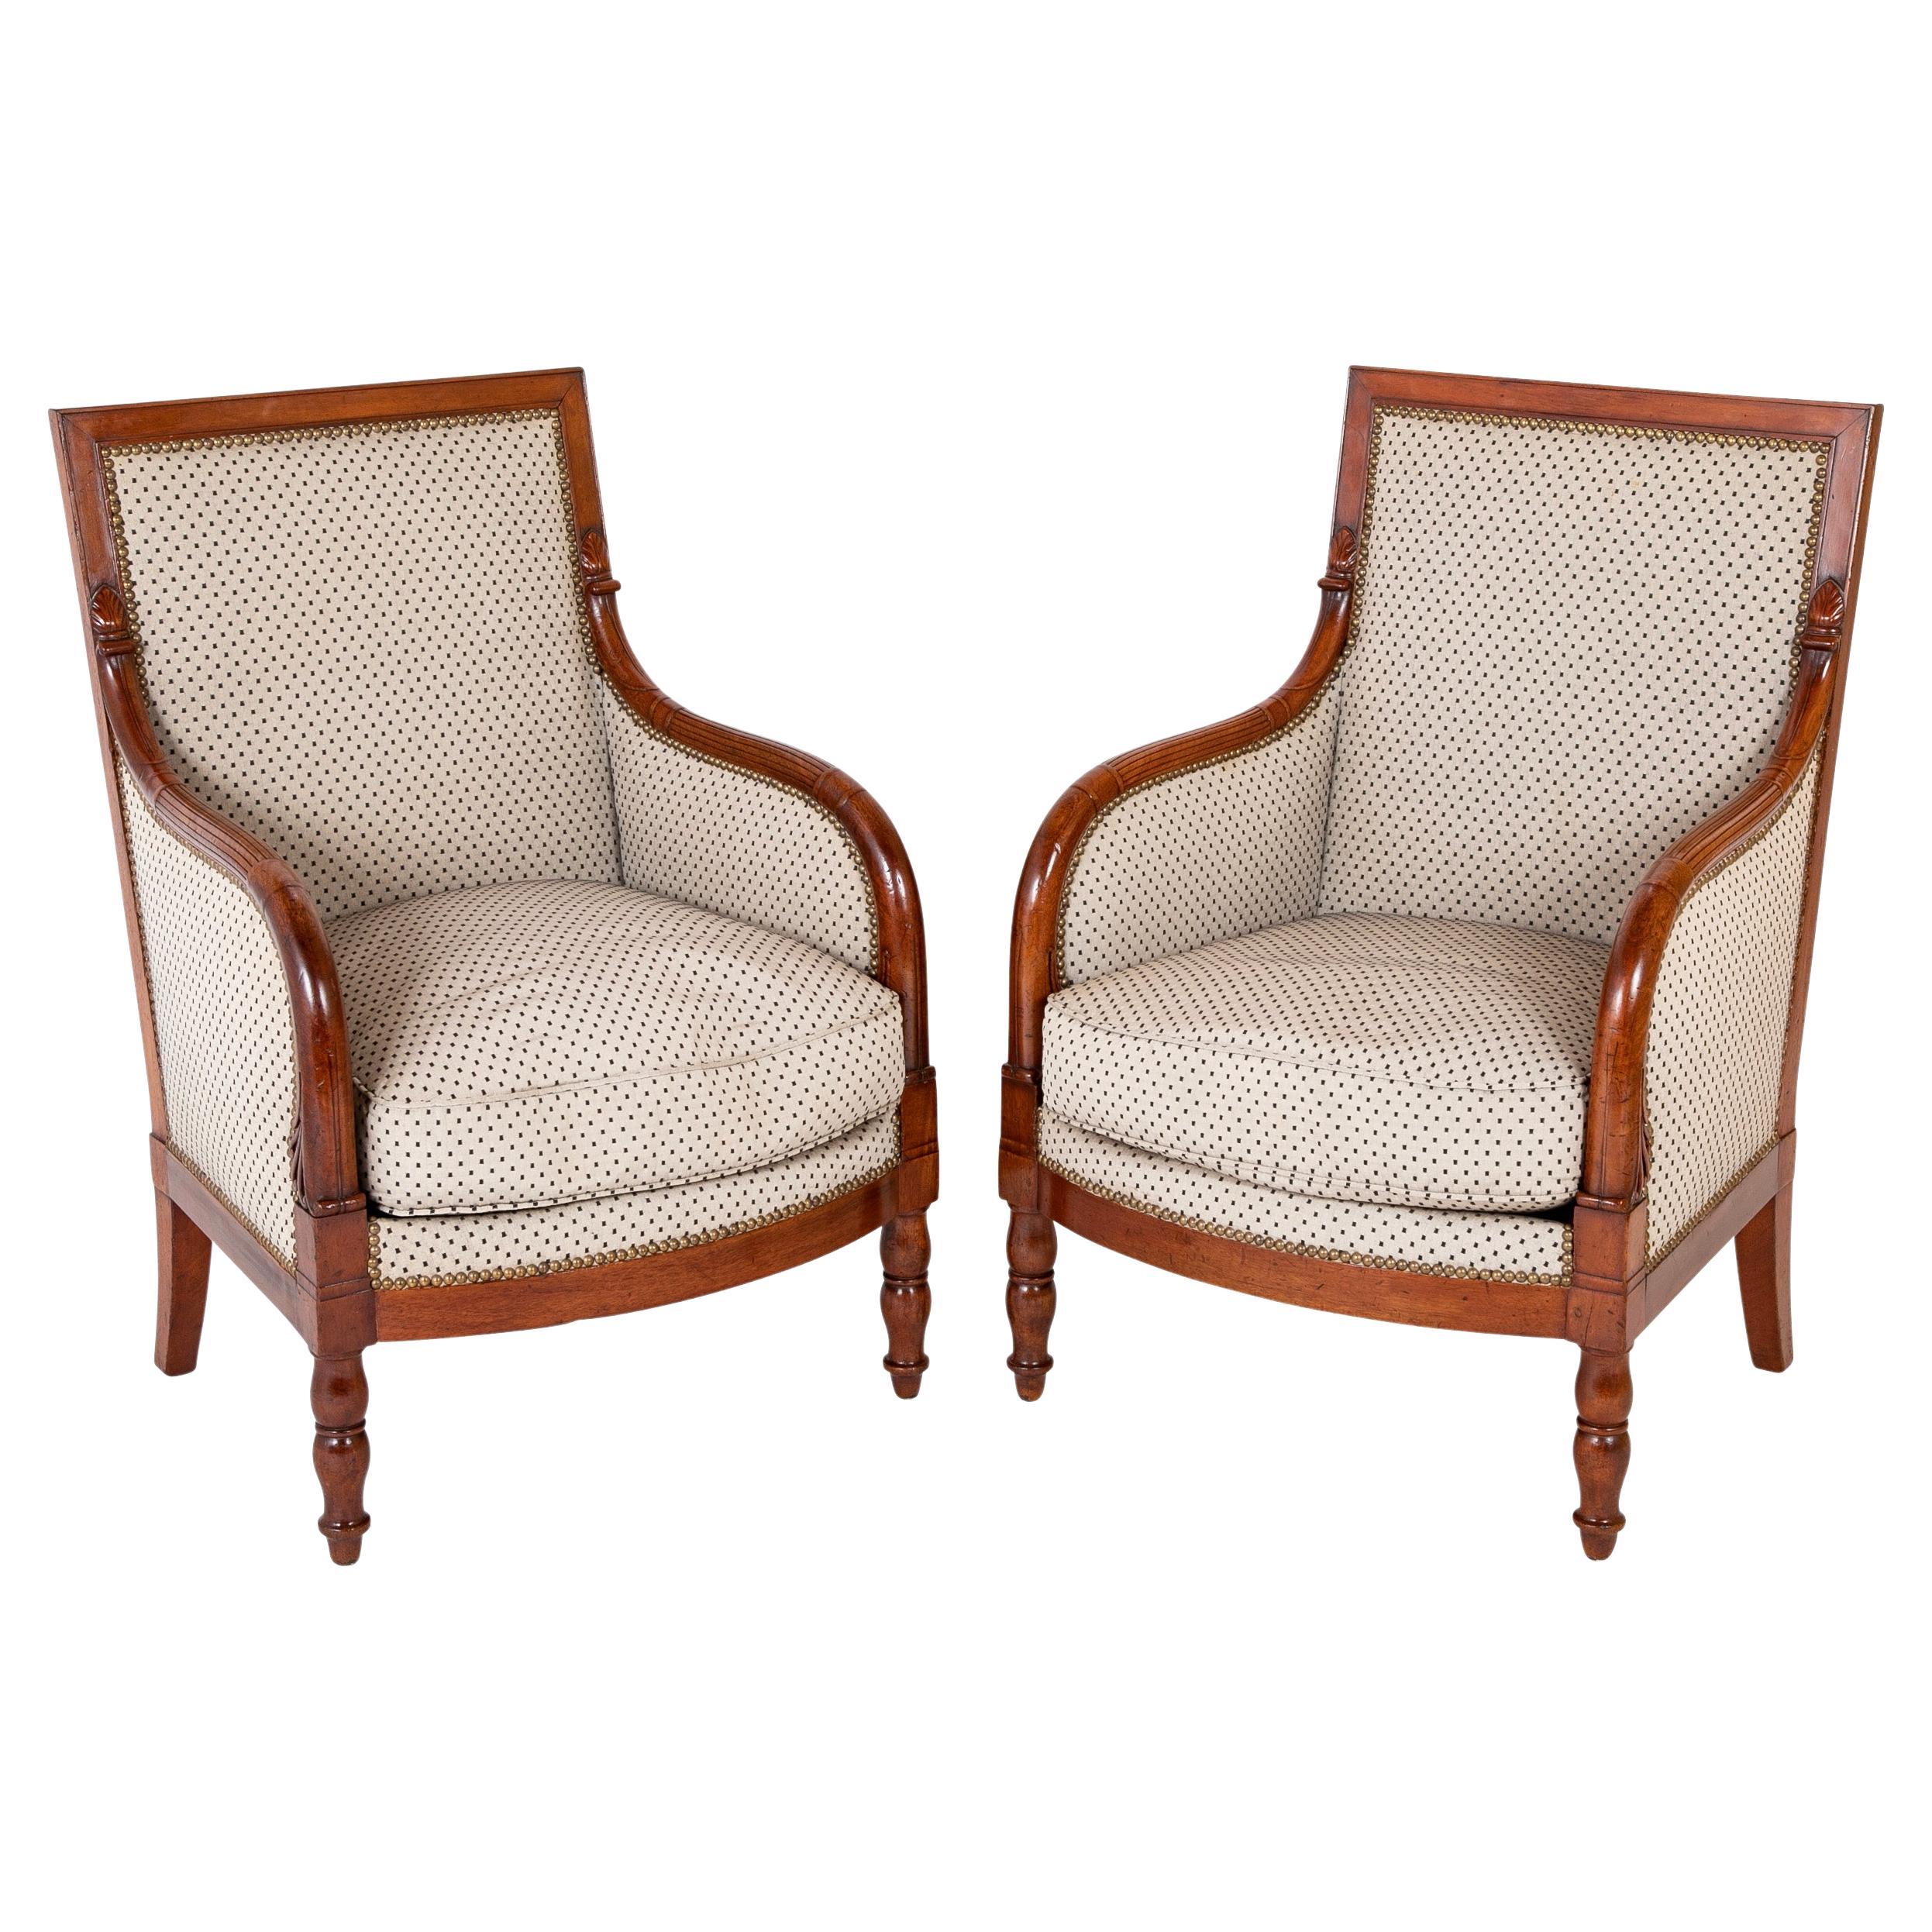 Pair of Empire Mahogany Armchairs Stamped "Jacob D R Medee"